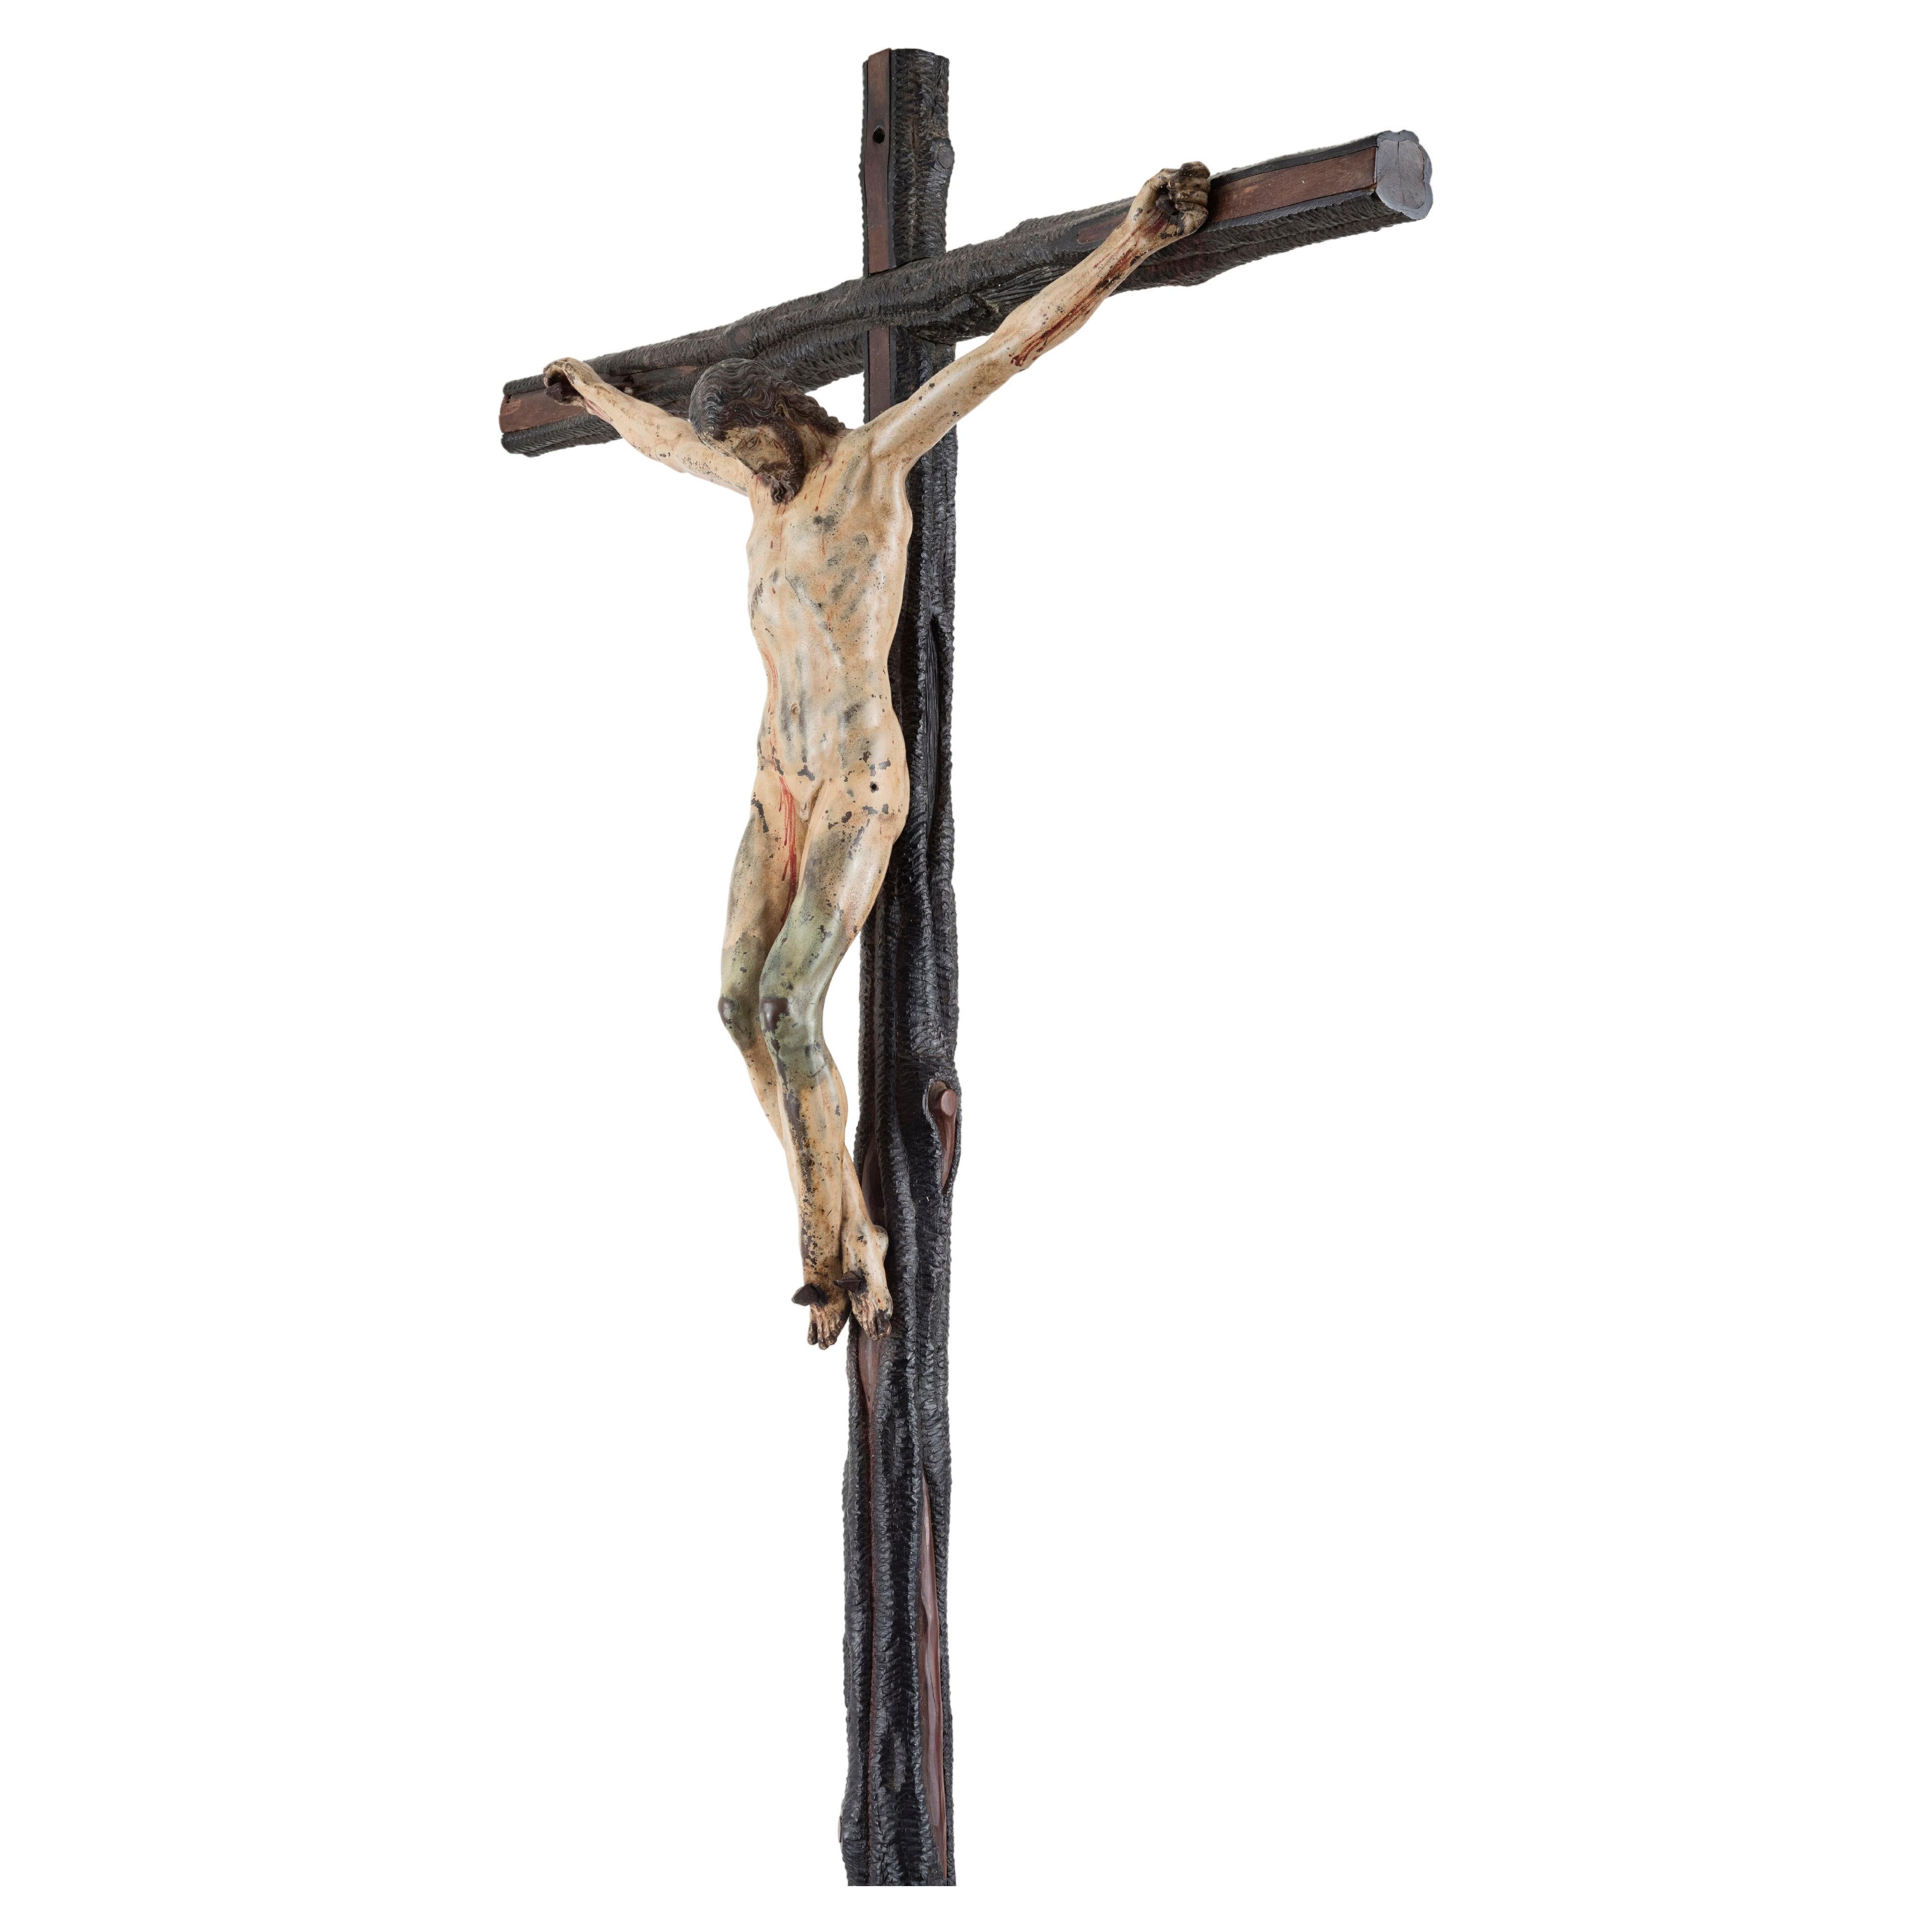 Rare and important painted bronze Crucifix after a model by Michelangelo